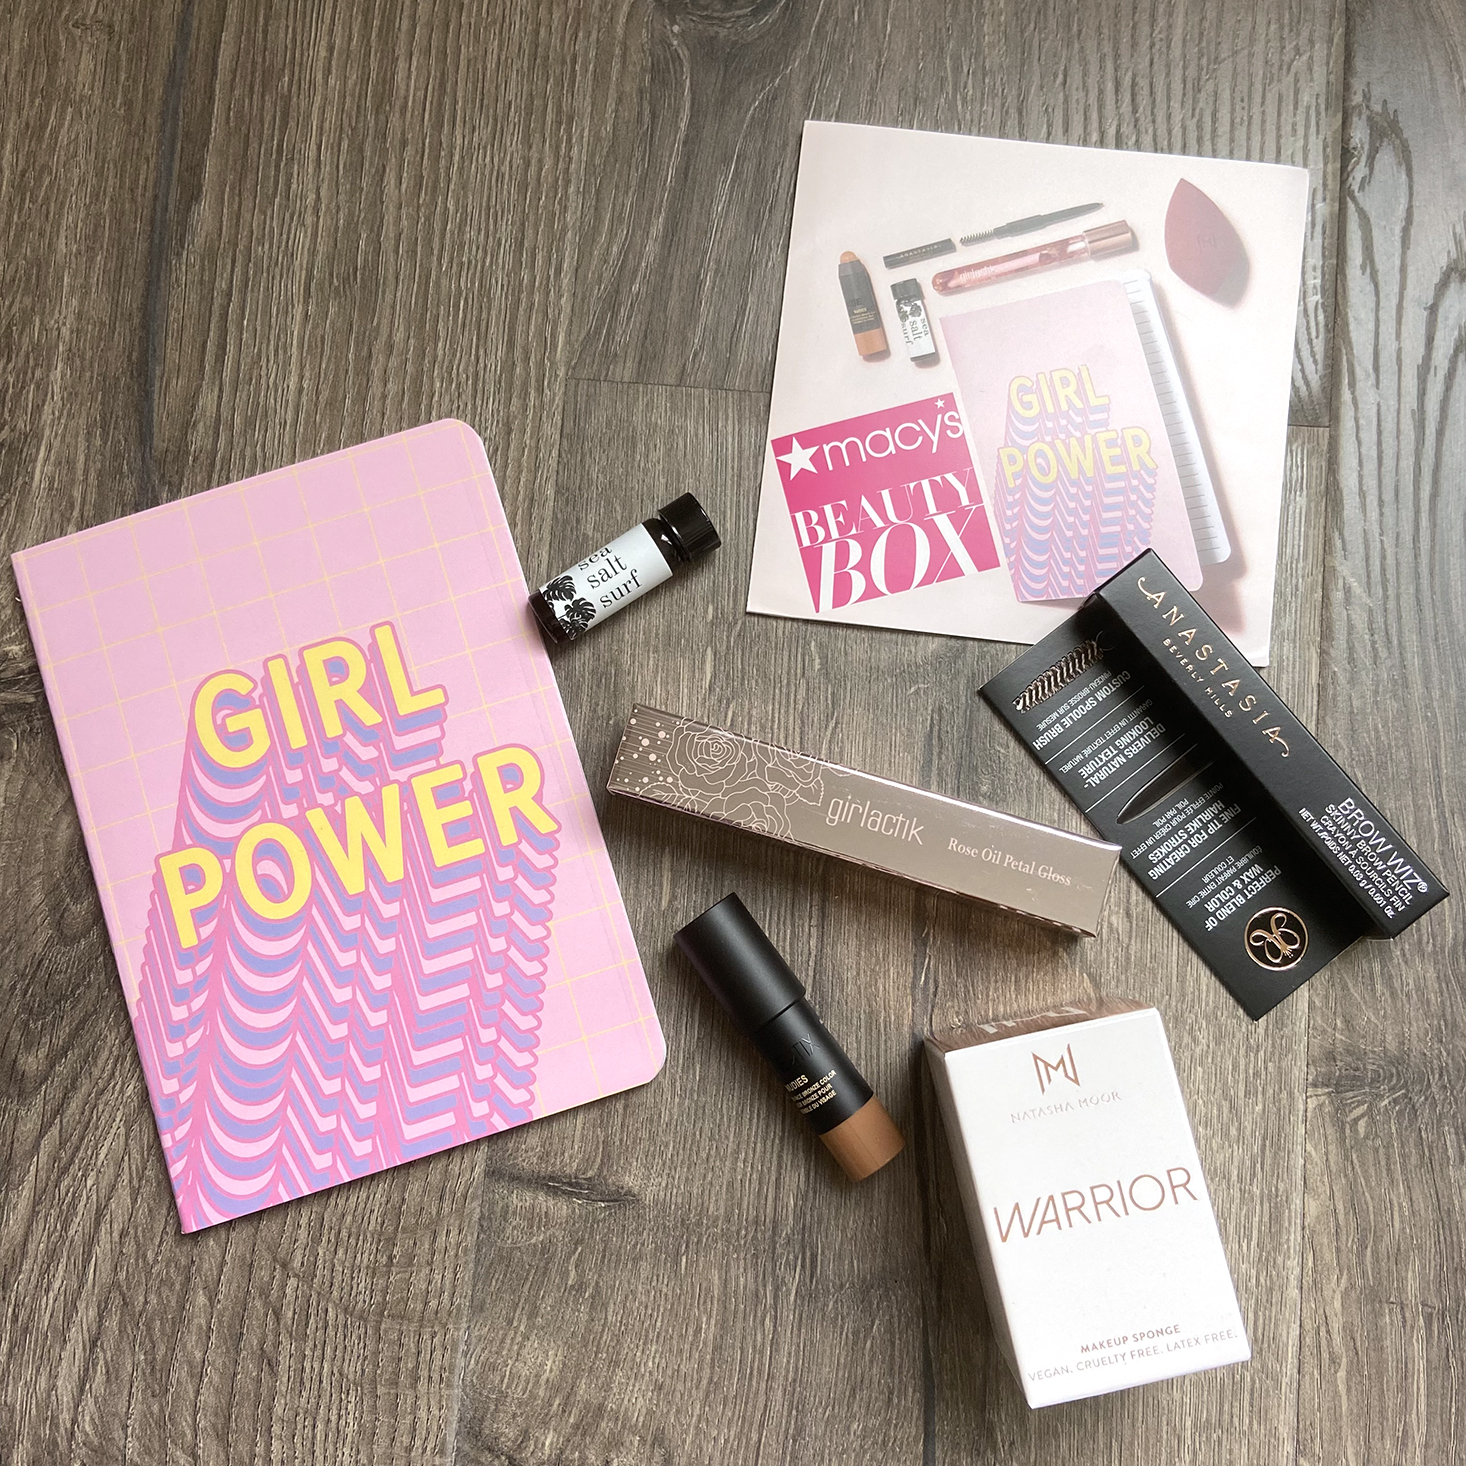 Macy’s Beauty Box Subscription March 2022 Review